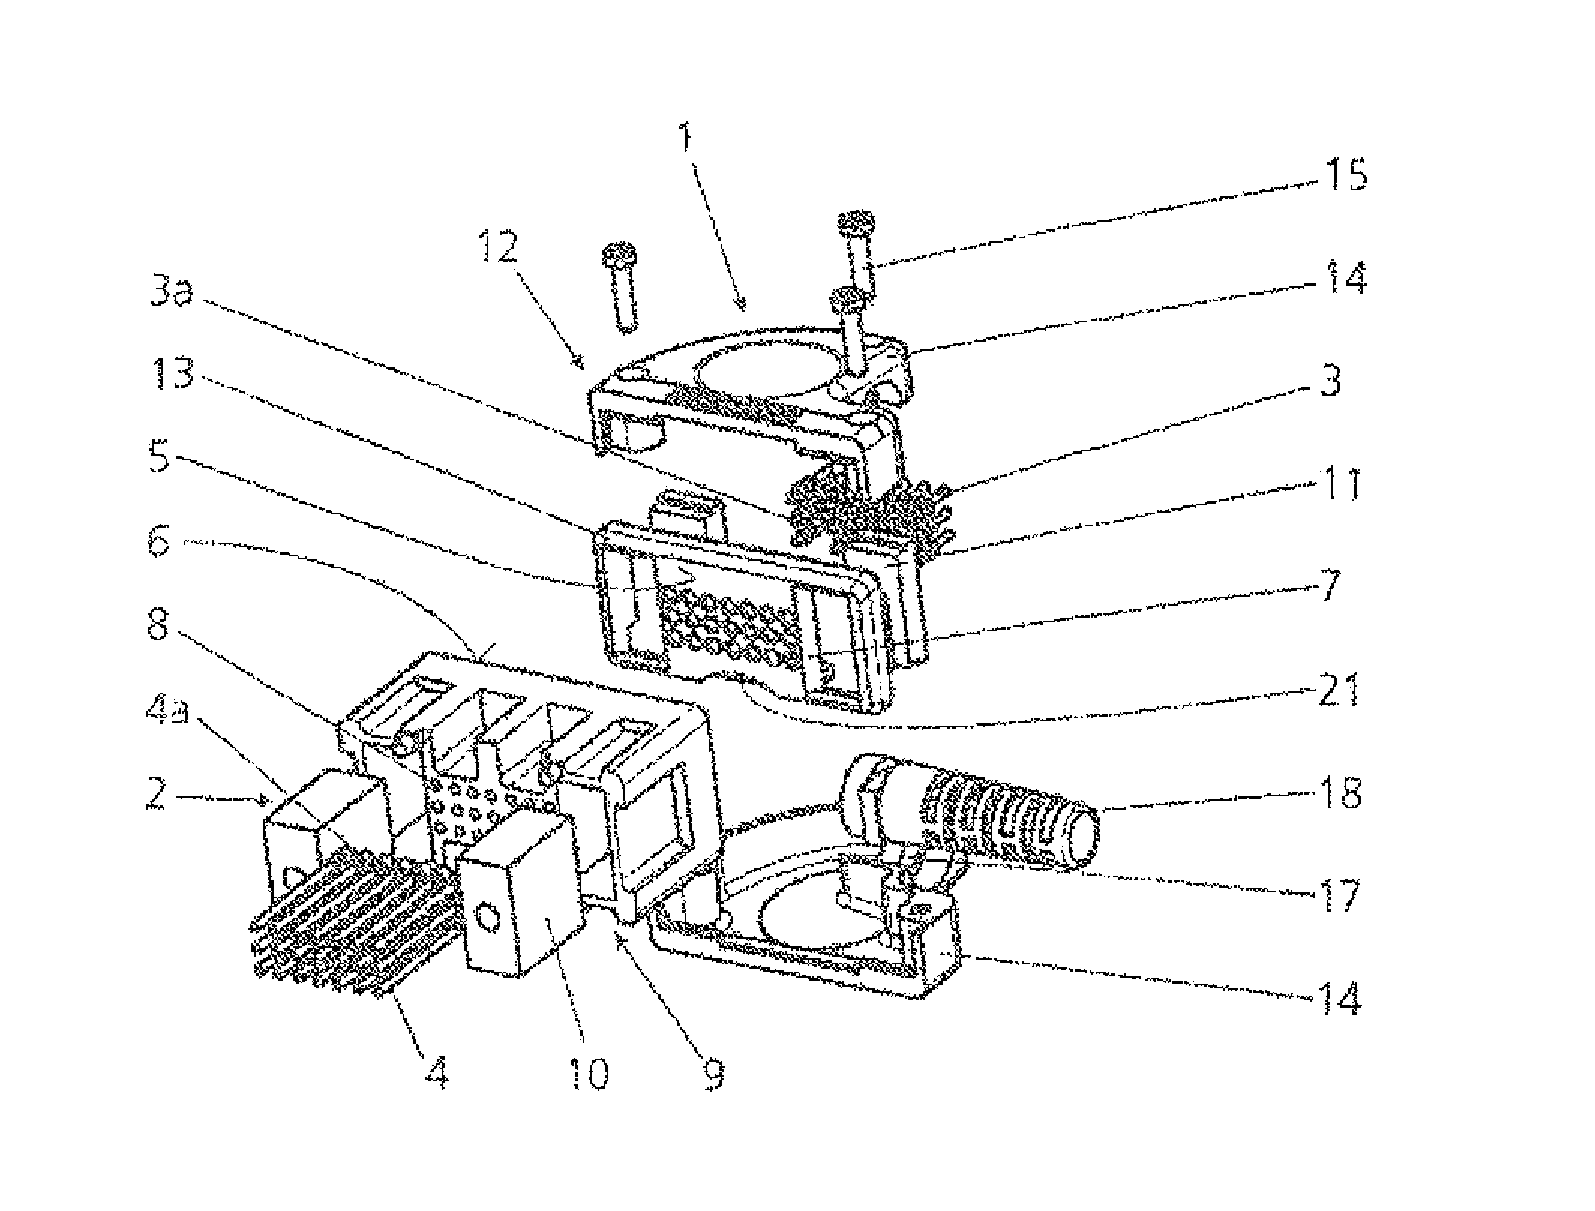 Electrical connection apparatus